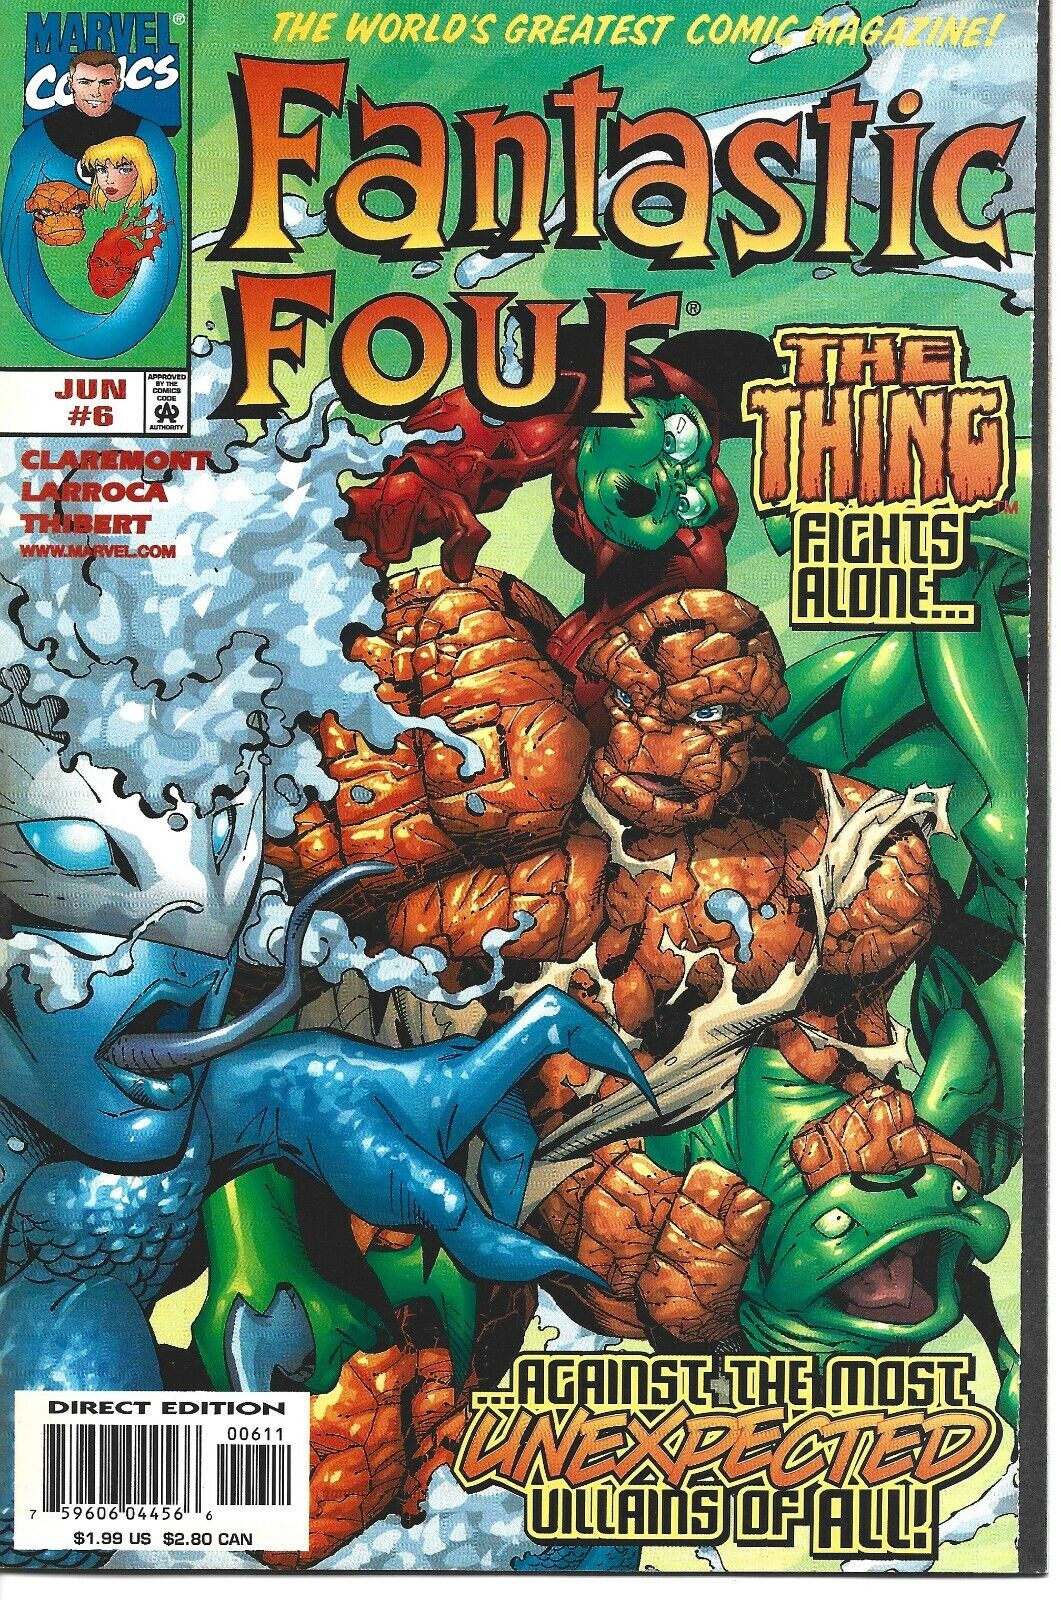 FANTASTIC FOUR #6 MARVEL COMICS 1998 BAGGED AND BOARDED